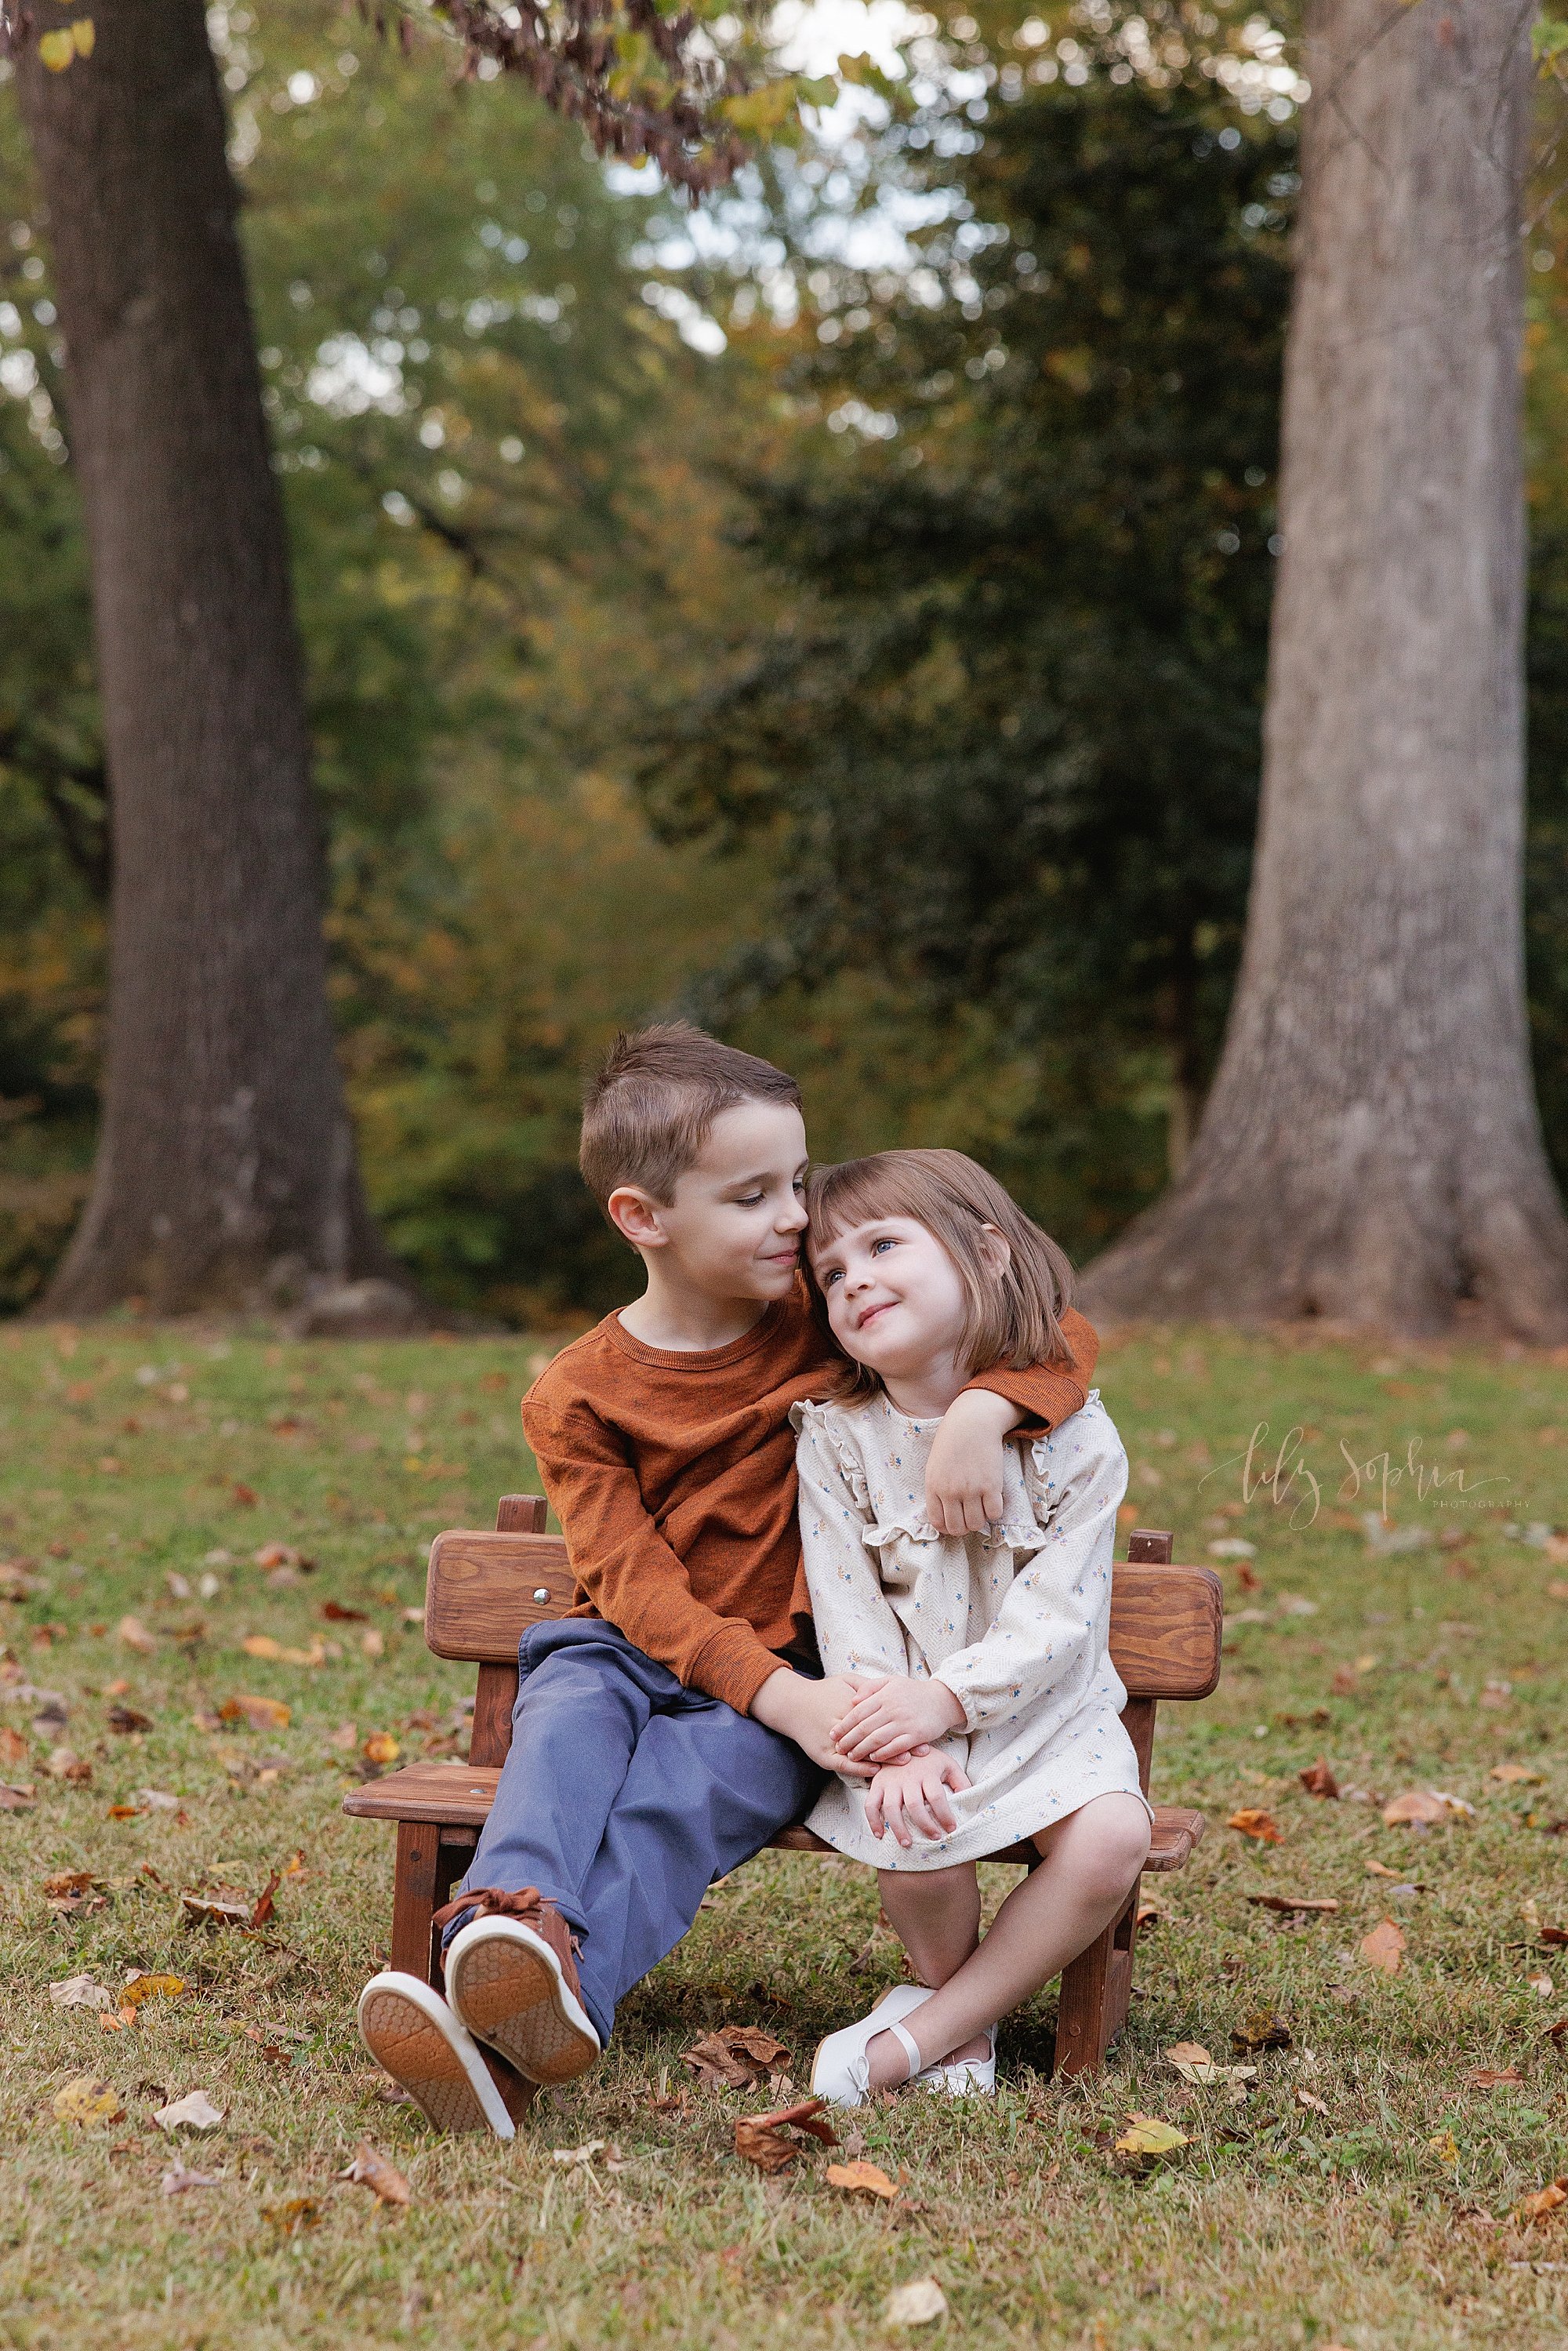 intown-atlanta-decatur-brookhaven-buckhead-outdoor-fall-pictures-family-photoshoot_5556.jpg